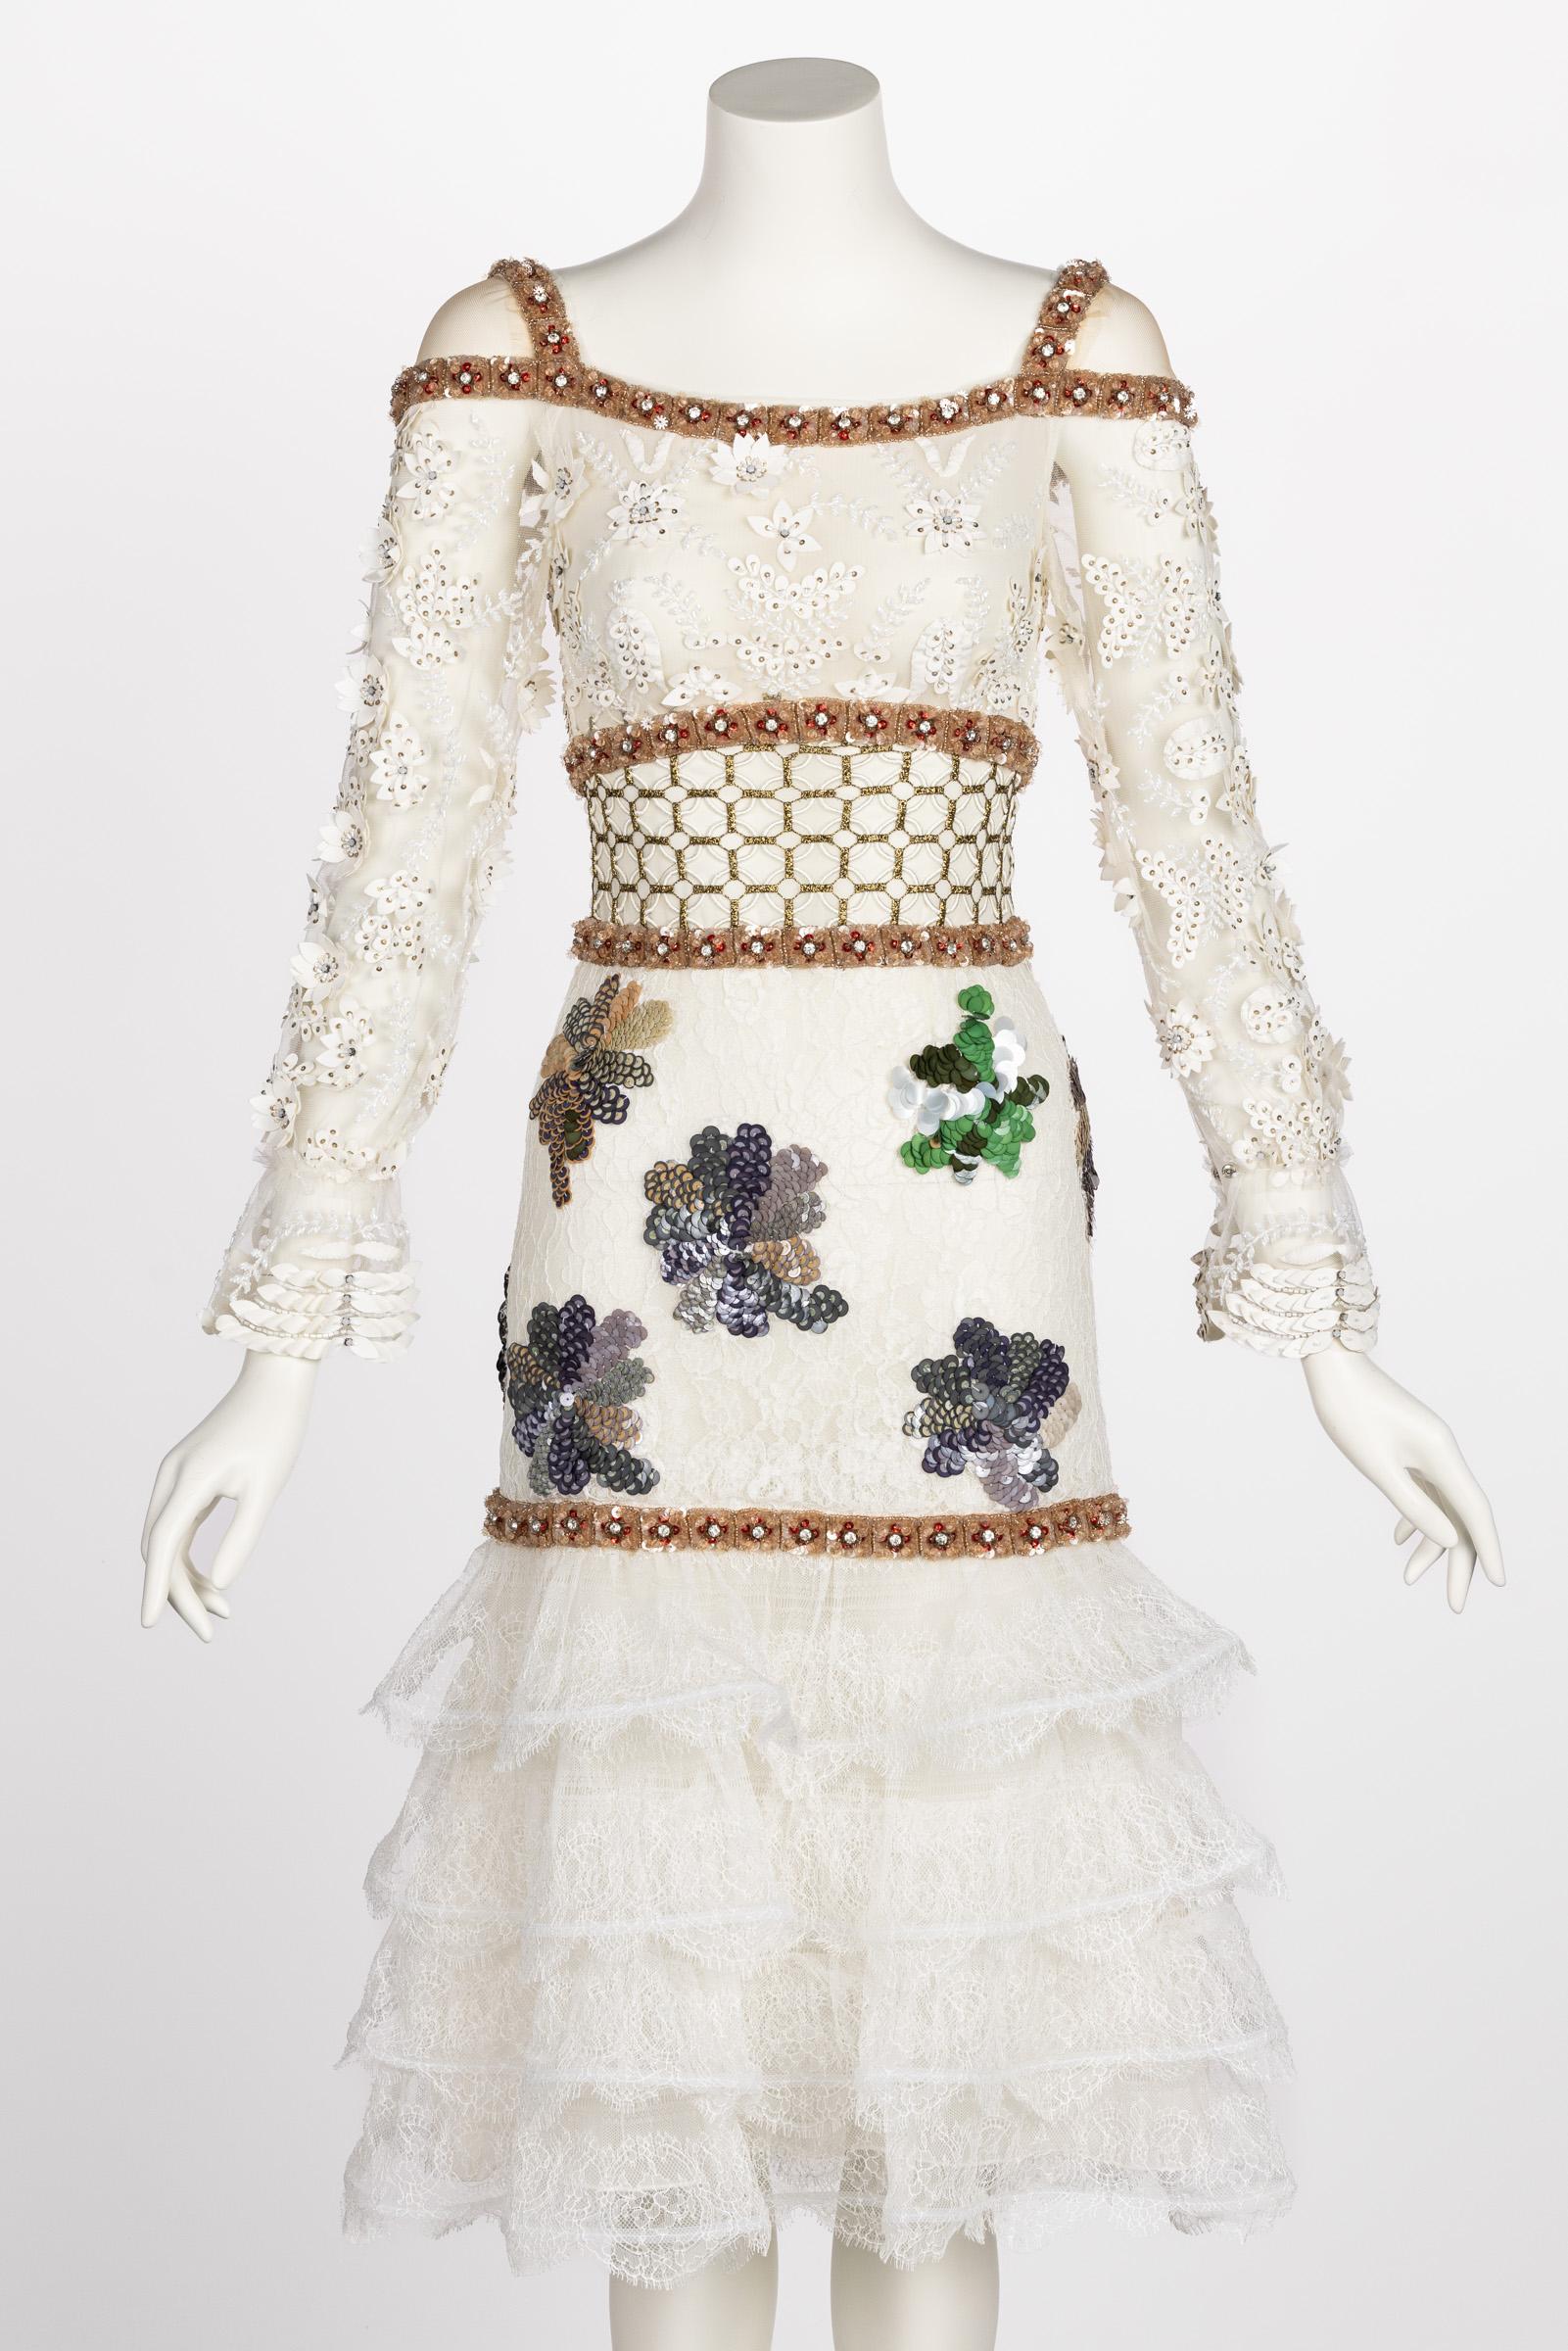 Creating beautiful clothes that channel a certain fantastic dreaminess has long been Rodarte’s calling card. Rodarte’s designs are held in permanent collections at world-class museums including The Costume Institute of the Metropolitan Museum of Art